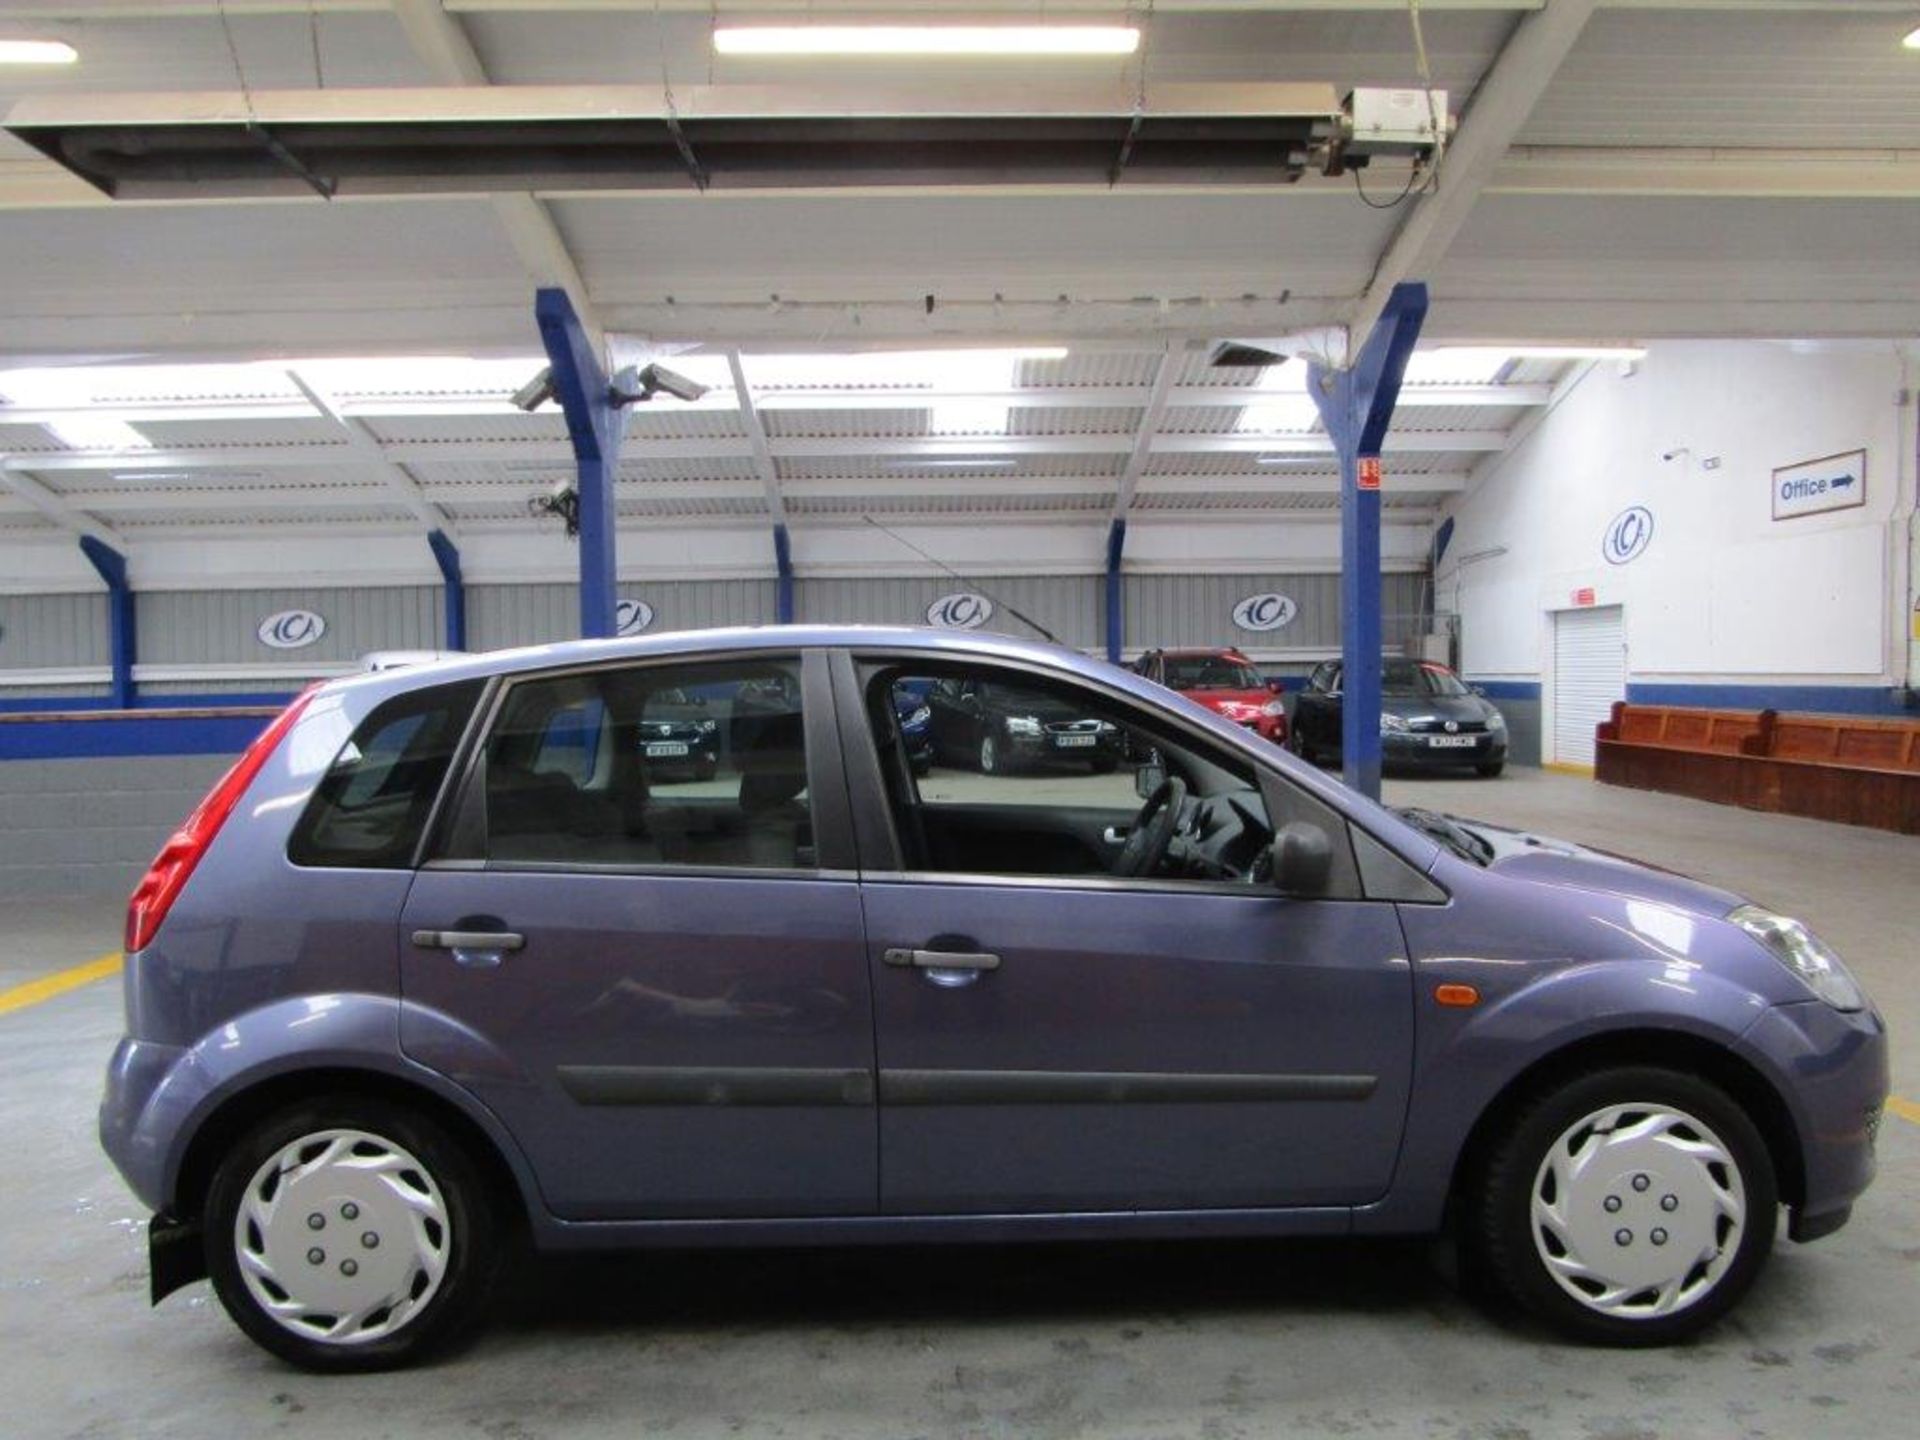 06 06 Ford Fiesta Style - Image 10 of 21